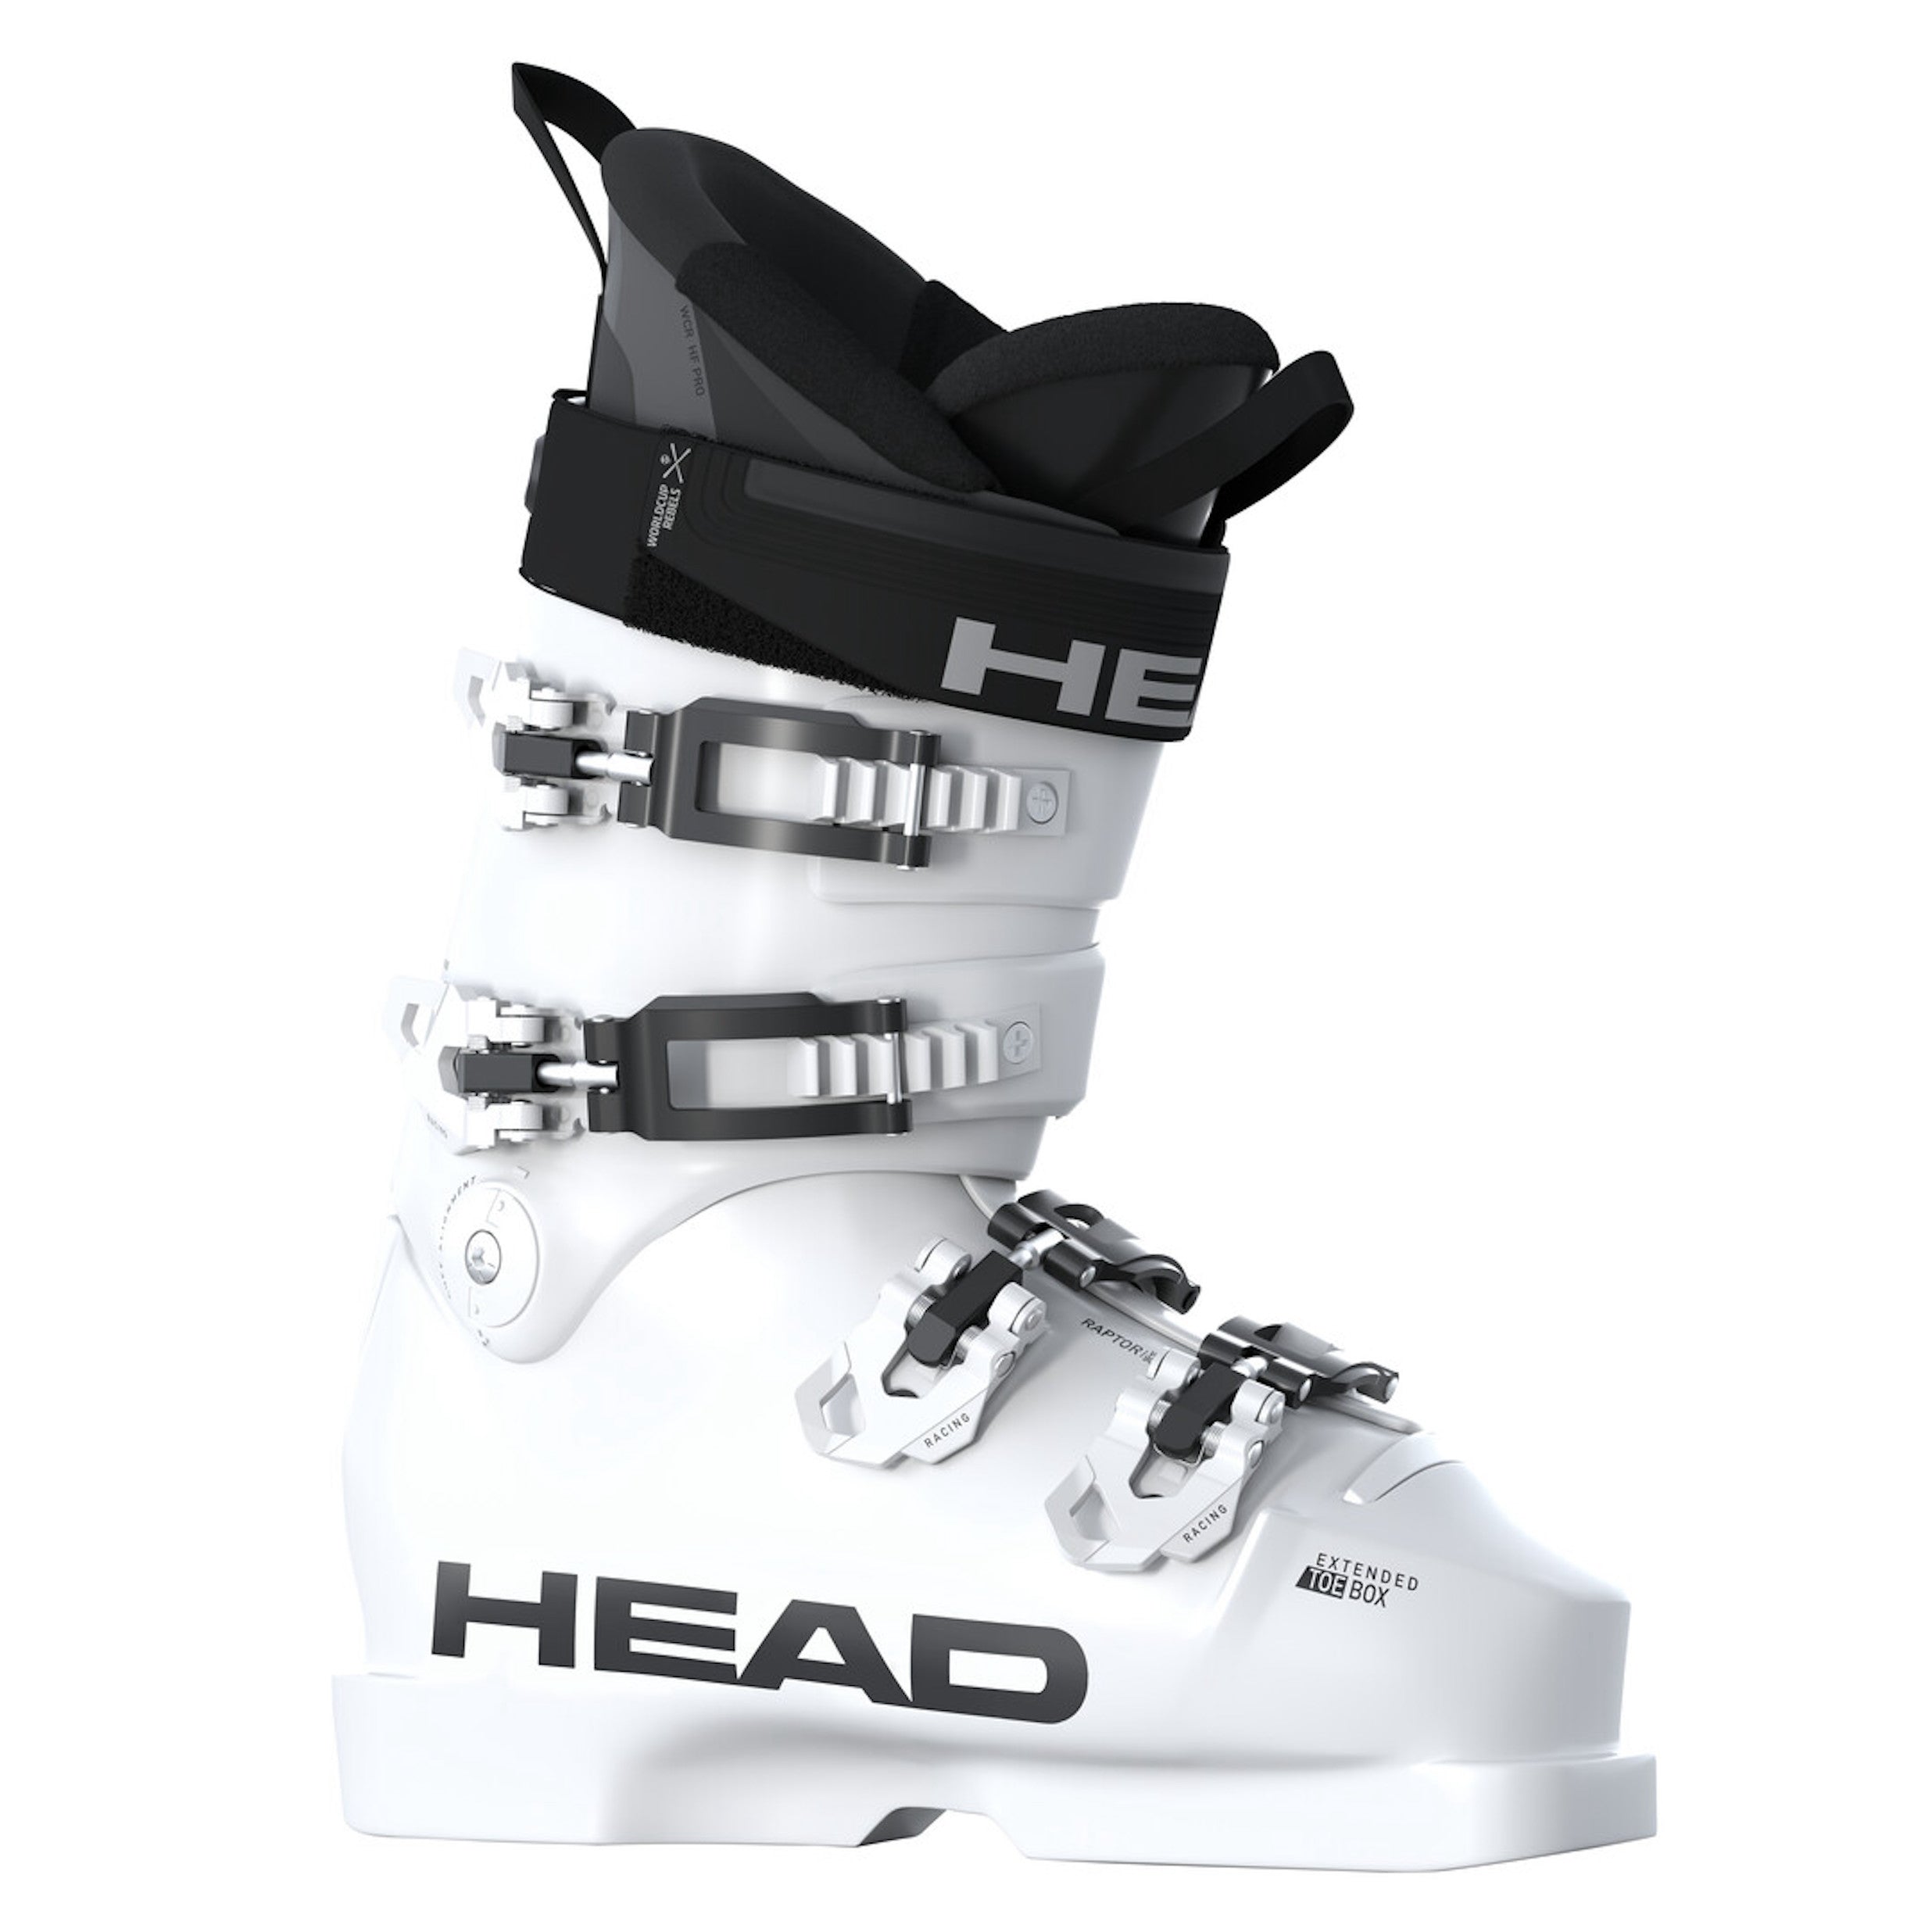 Junior Head Raptor WCR 90 ski boot, all white with black accents and black power strap.